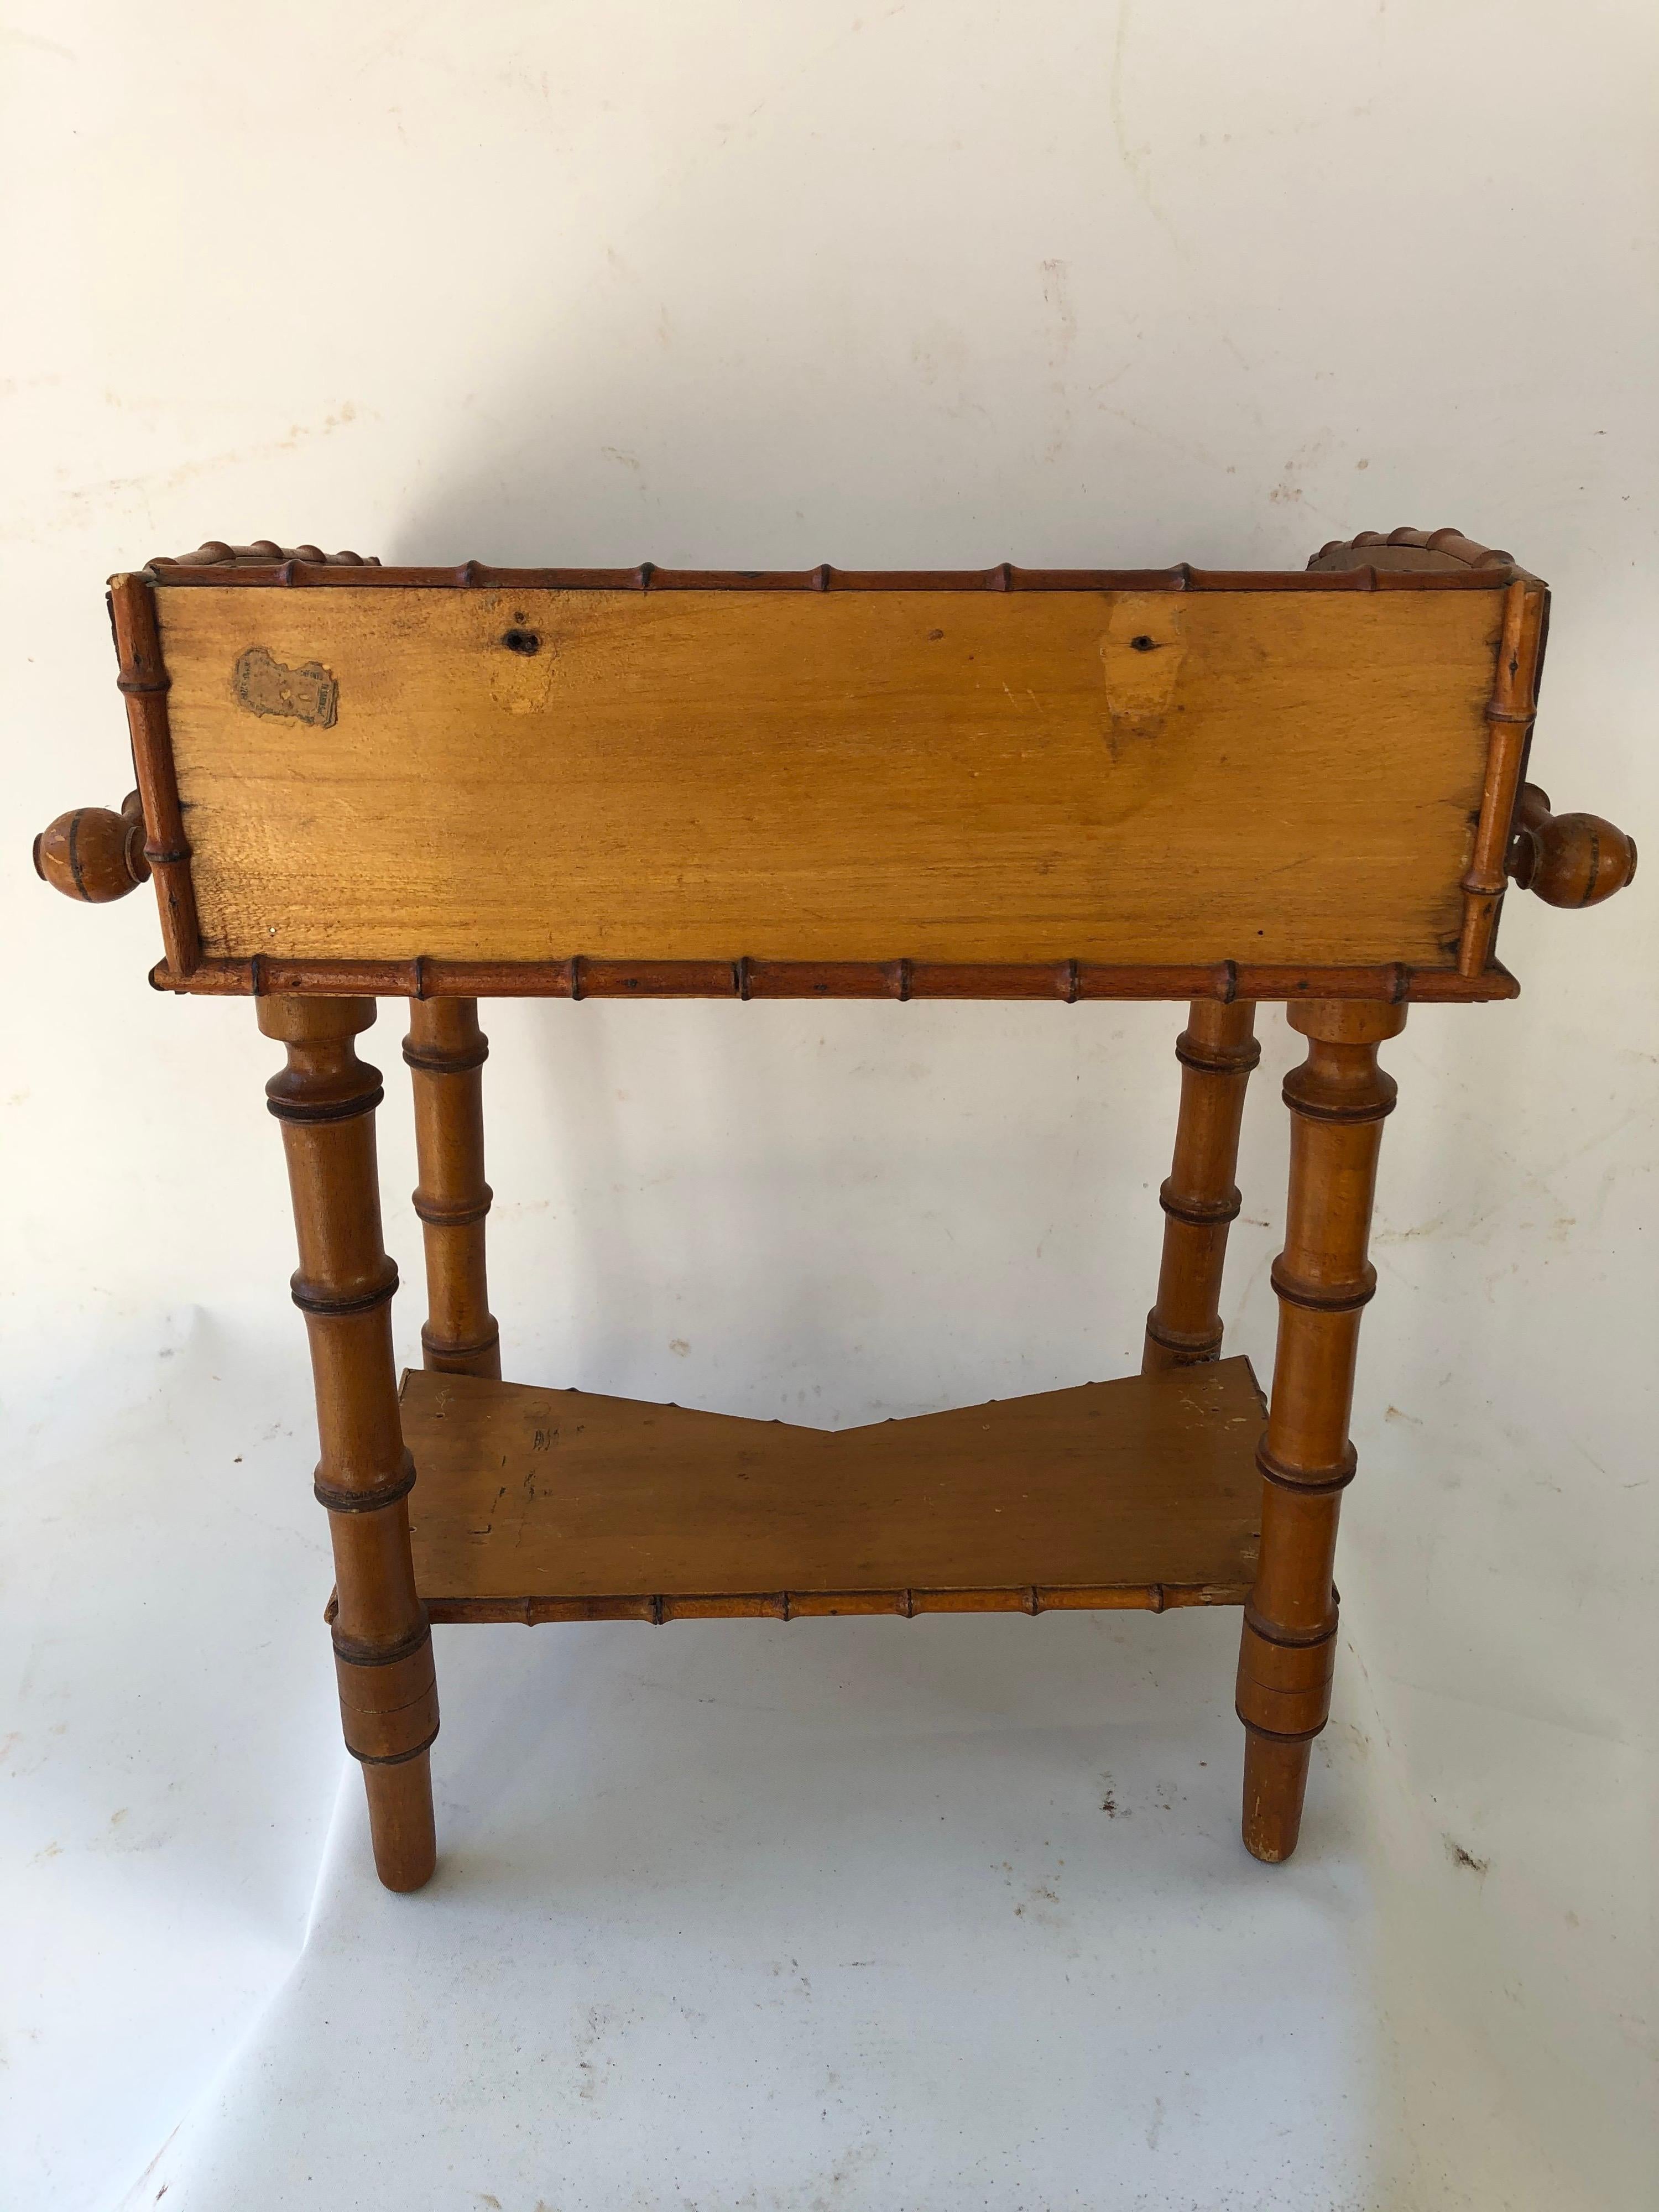 Beautifully crafted faux bamboo miniature washstand with white marble top and one drawer. Probably Victorian era salesman's sample or made by a talented hobbyist. Also works well as a small table next to a
chair or sofa.